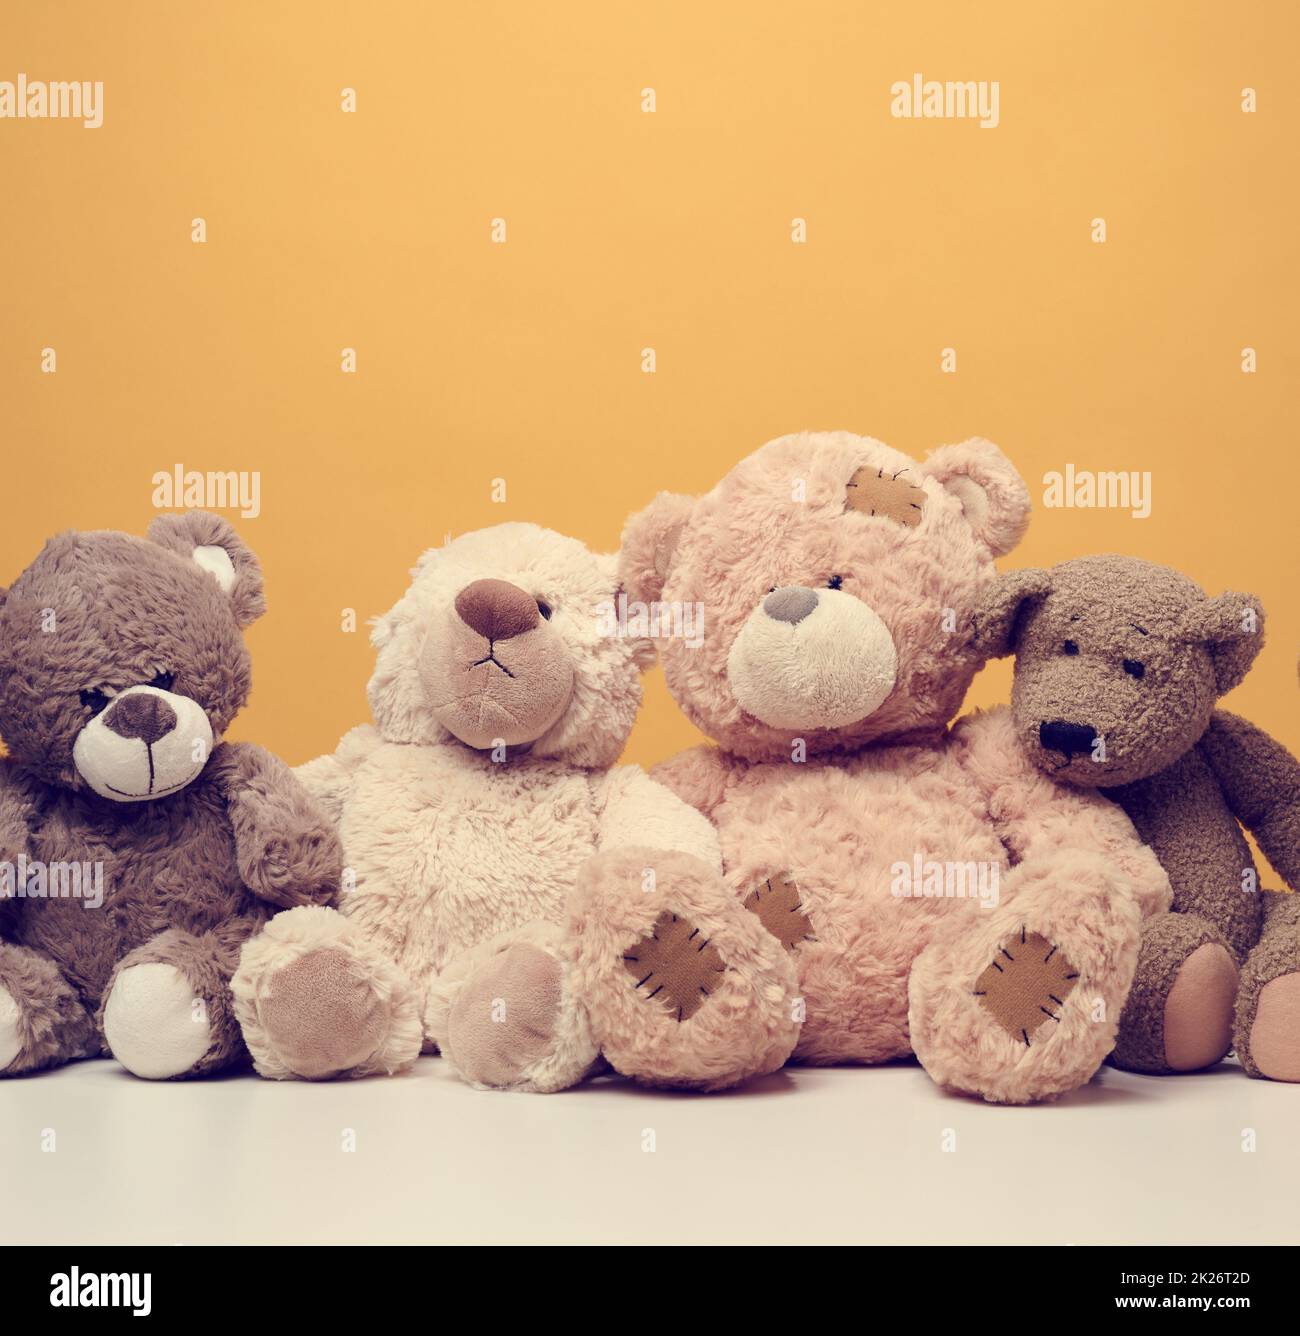 group of cute brown teddy bears sit on yellow background, childrens toy Stock Photo